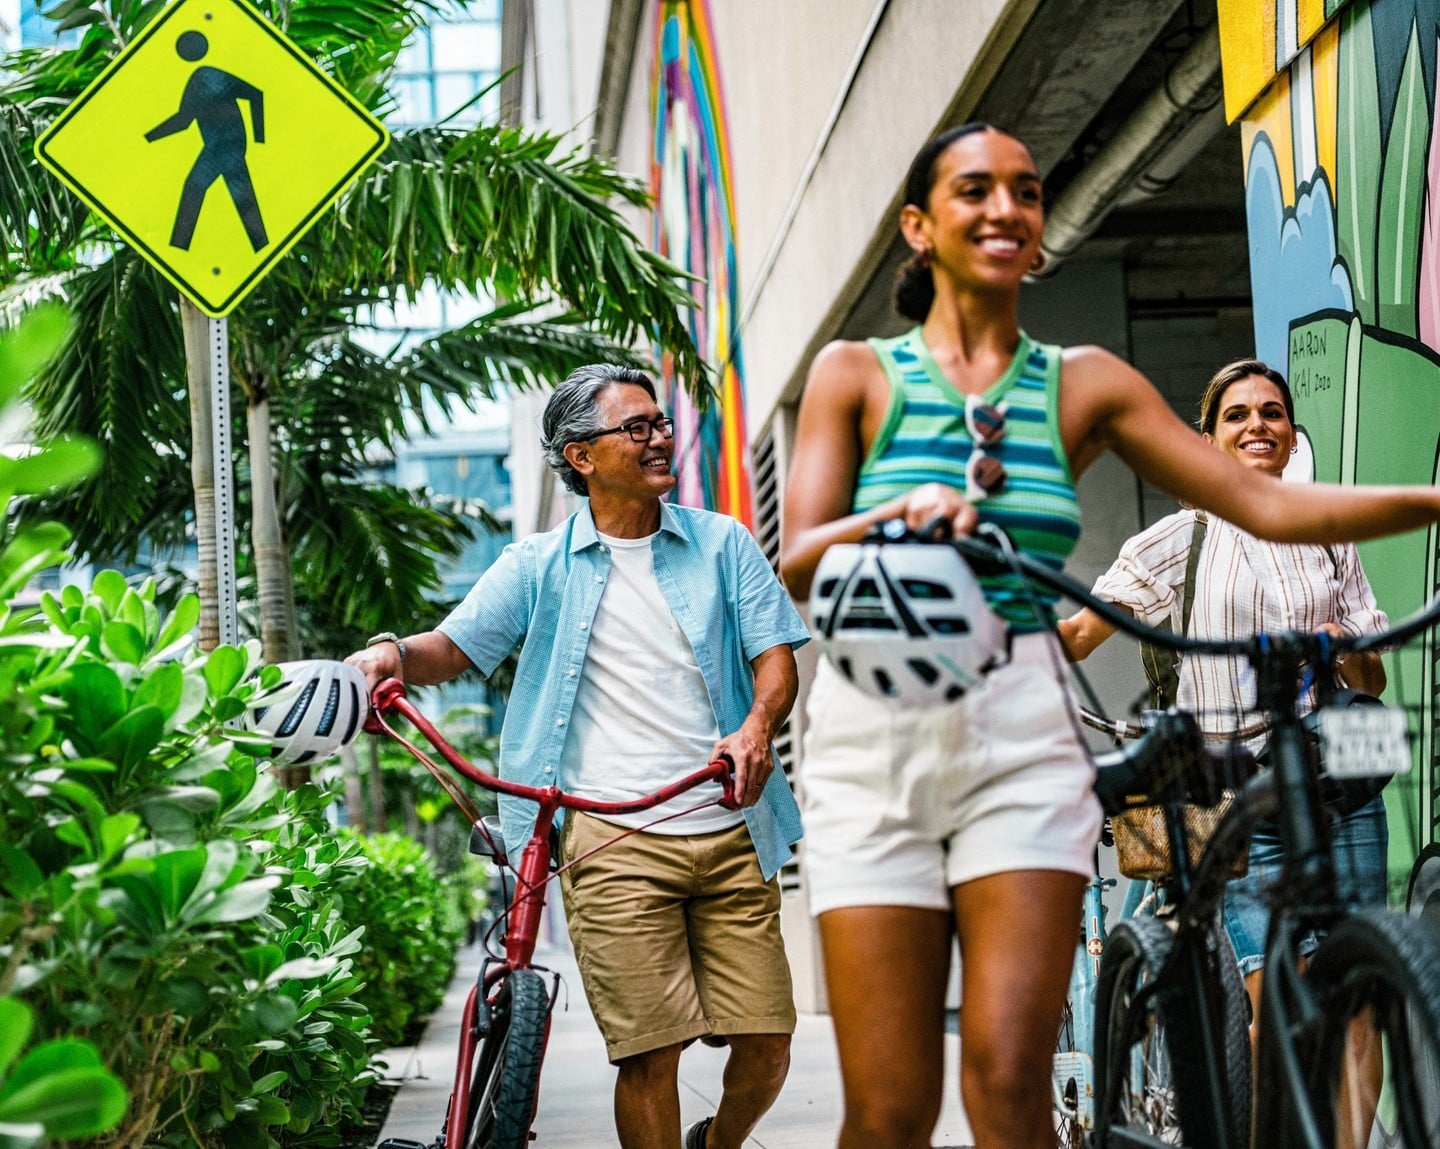 Cruise the neighborhood on two wheels! At Ward Village, you'll find dedicated bike racks and @gobiki stops within each district, so you can shop, dine and explore with ease.